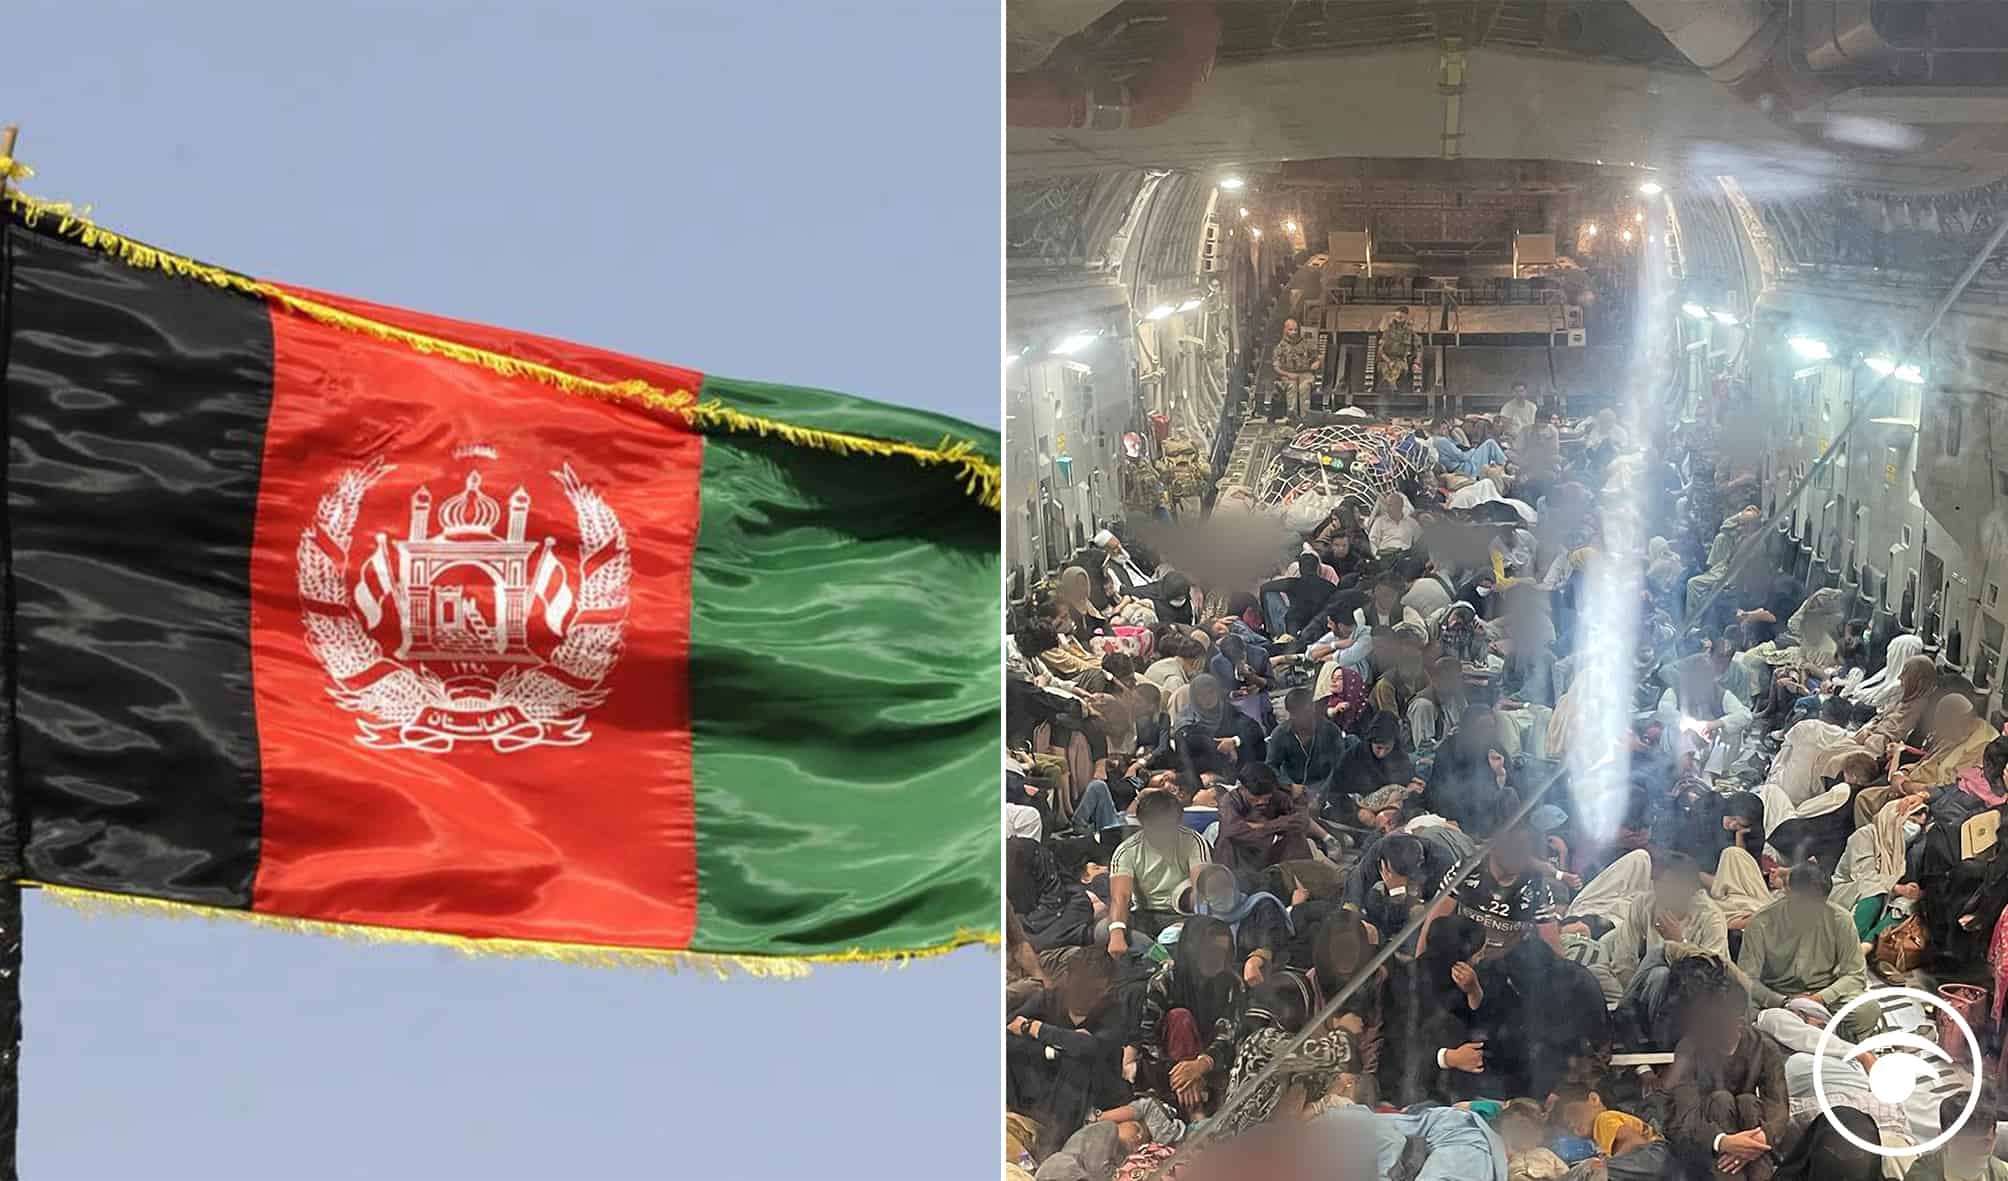 ‘Sign of solidarity:’ Afghanistan flag to be displayed in Paralympic ceremony